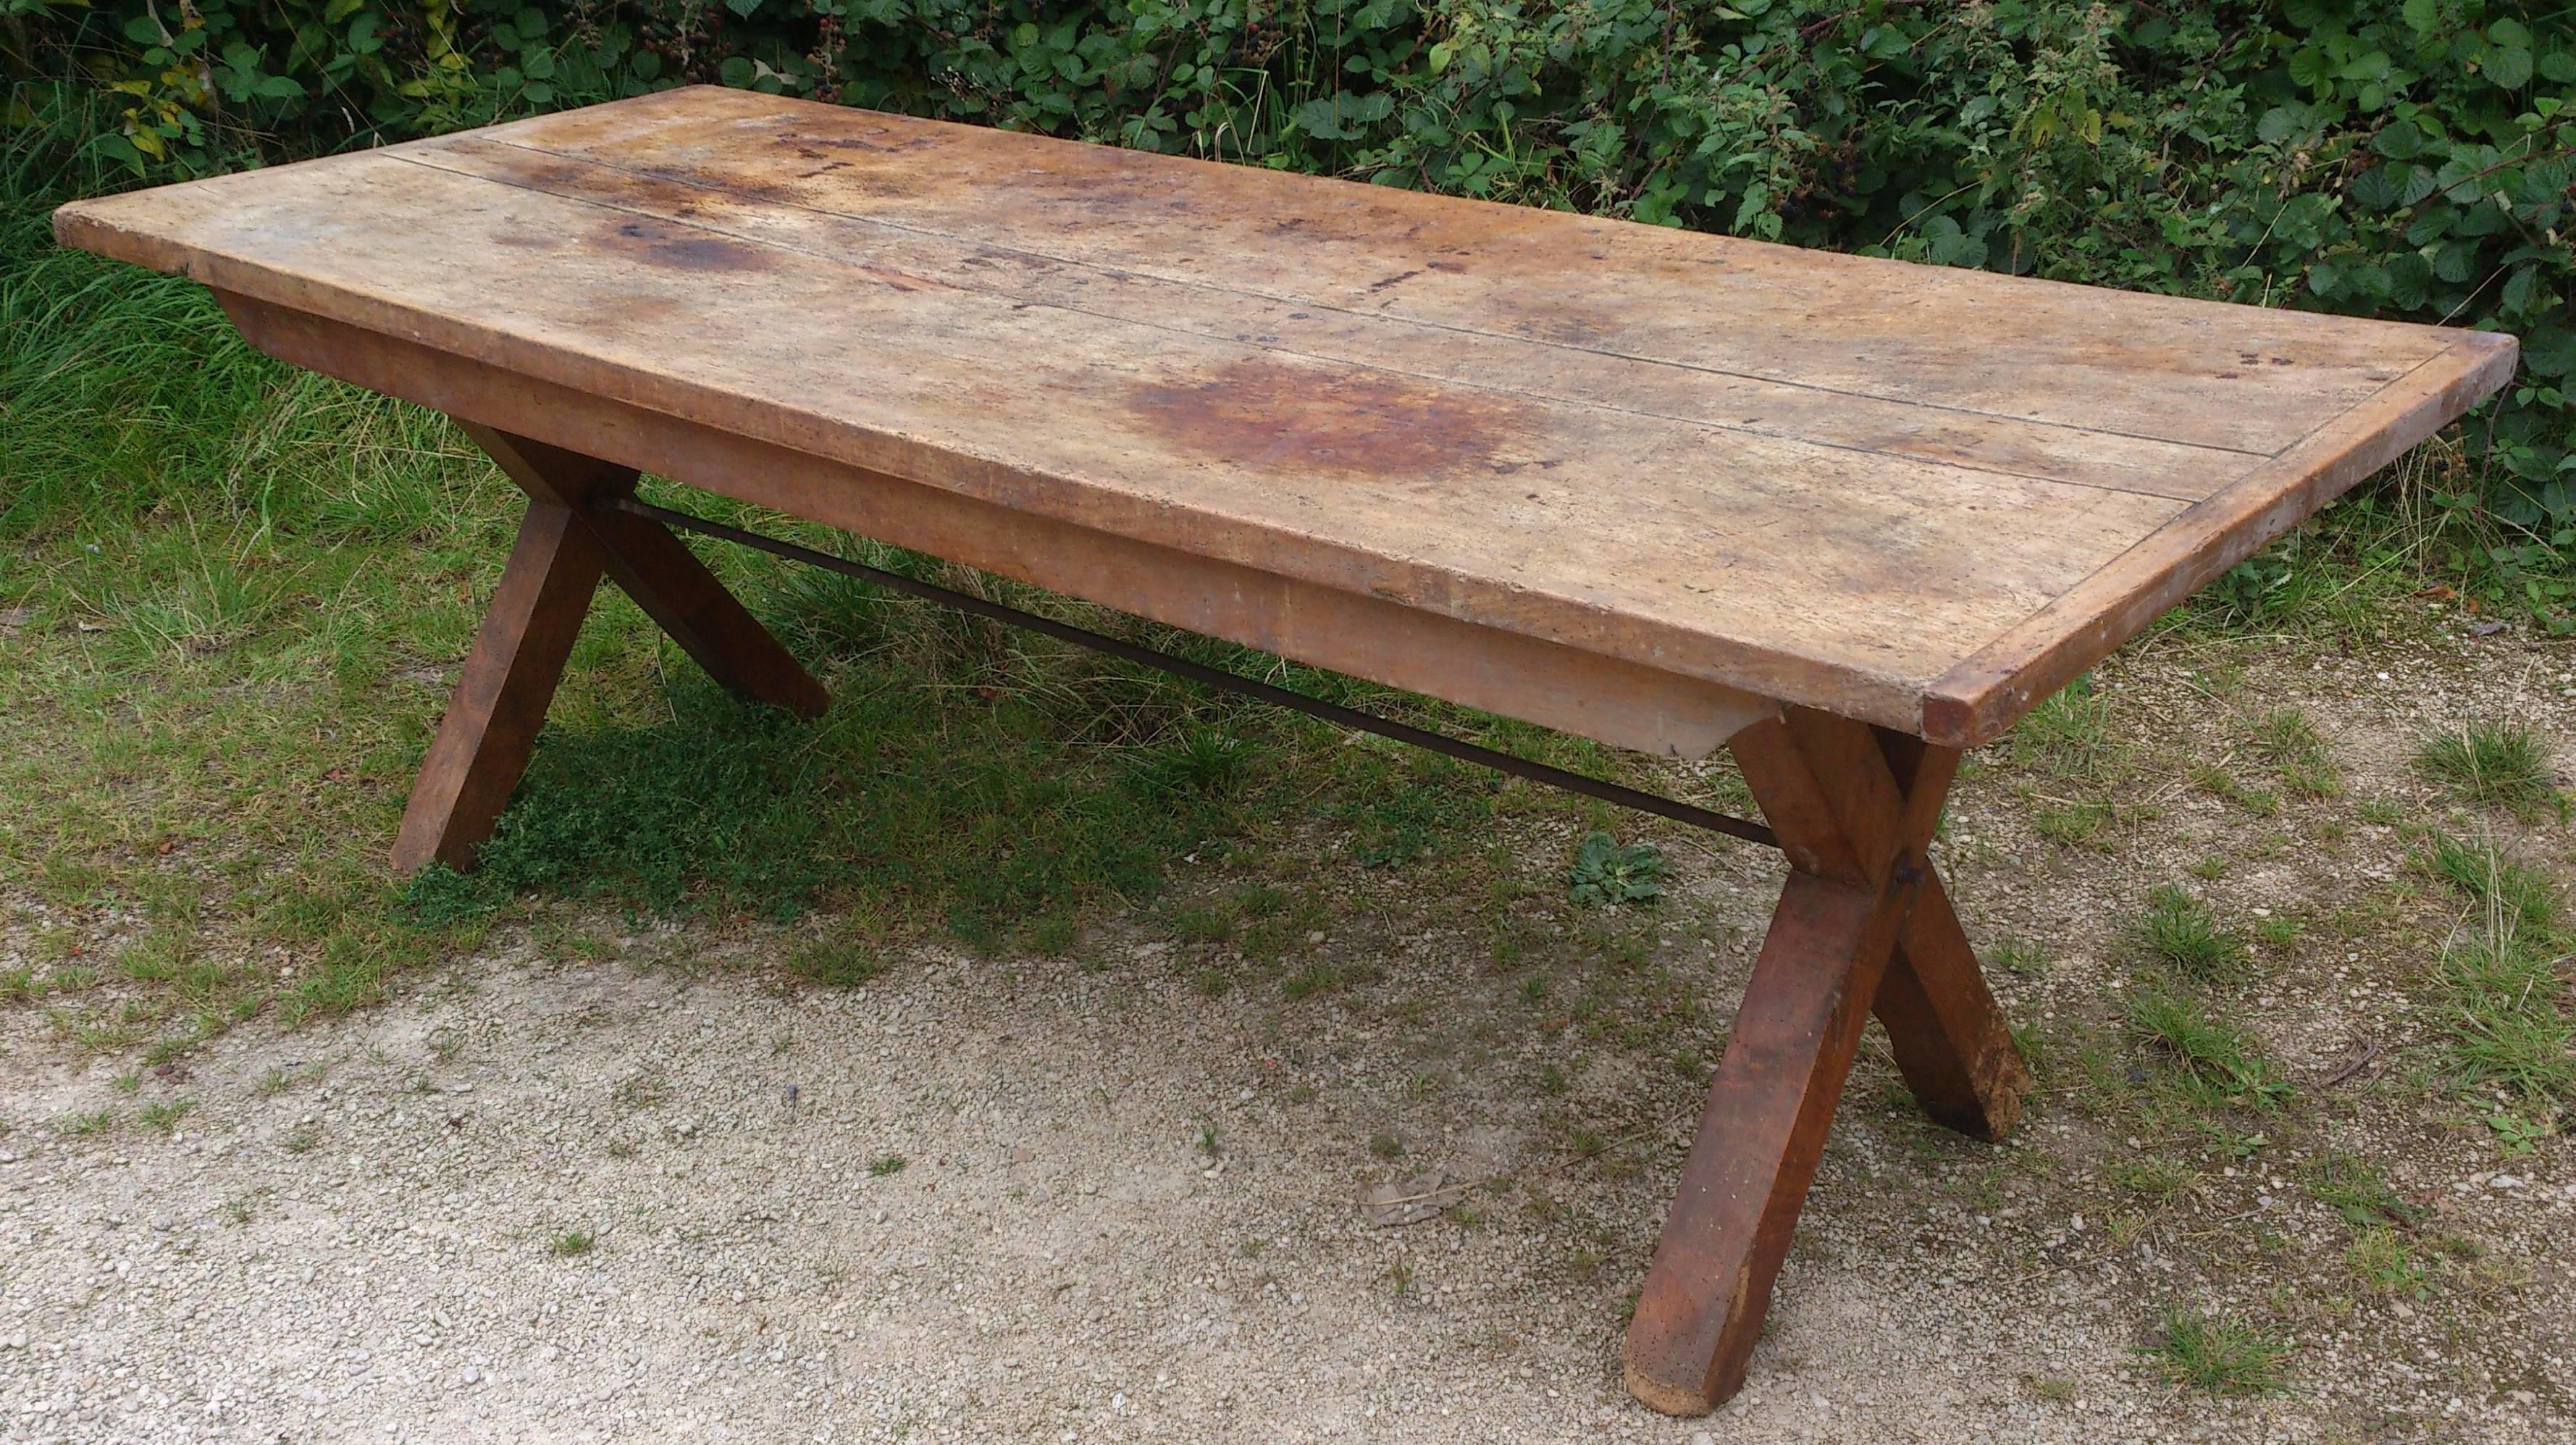 18th century antique refectory dining table. This table has a lot of things going for it, it is charming, has great patination and is extremely practical. The charming part is that it has a really tactile faded surface, all it needs is a little wax